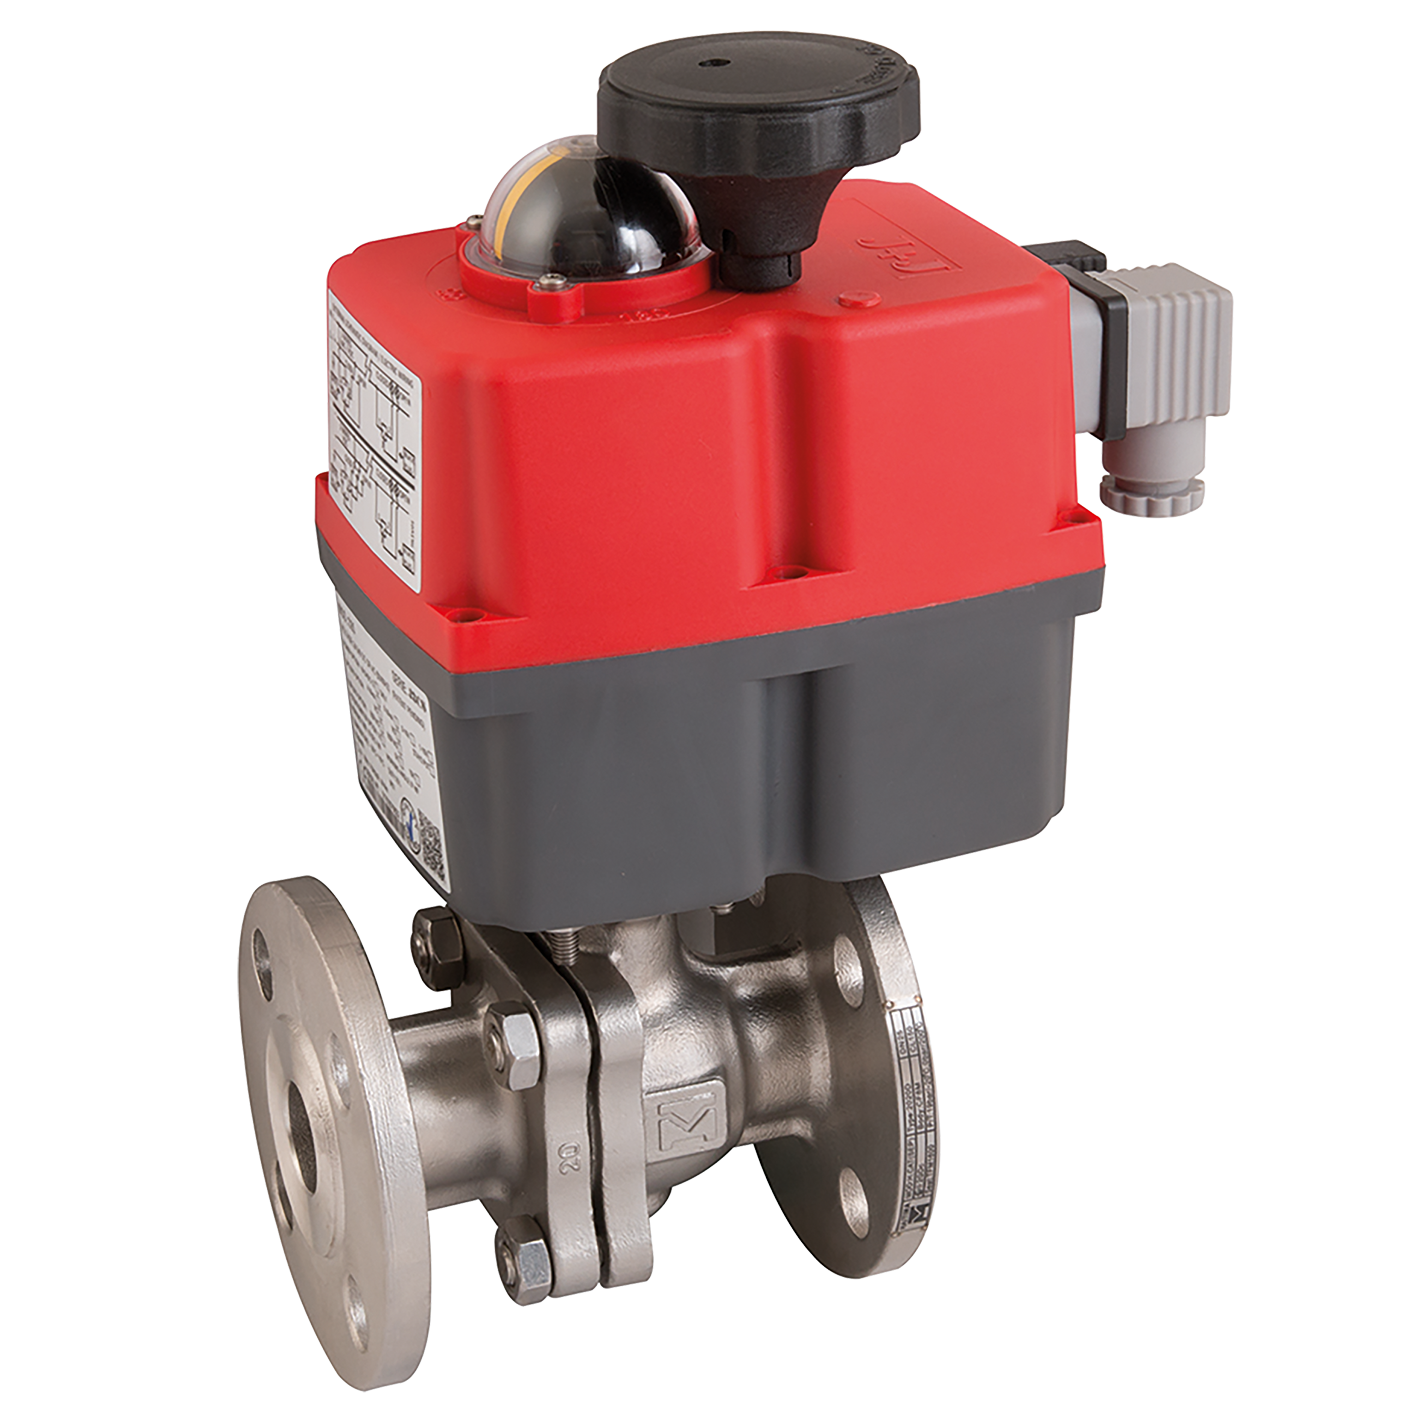 UK Suppliers of Electric Actuated Stainless Steel Valve